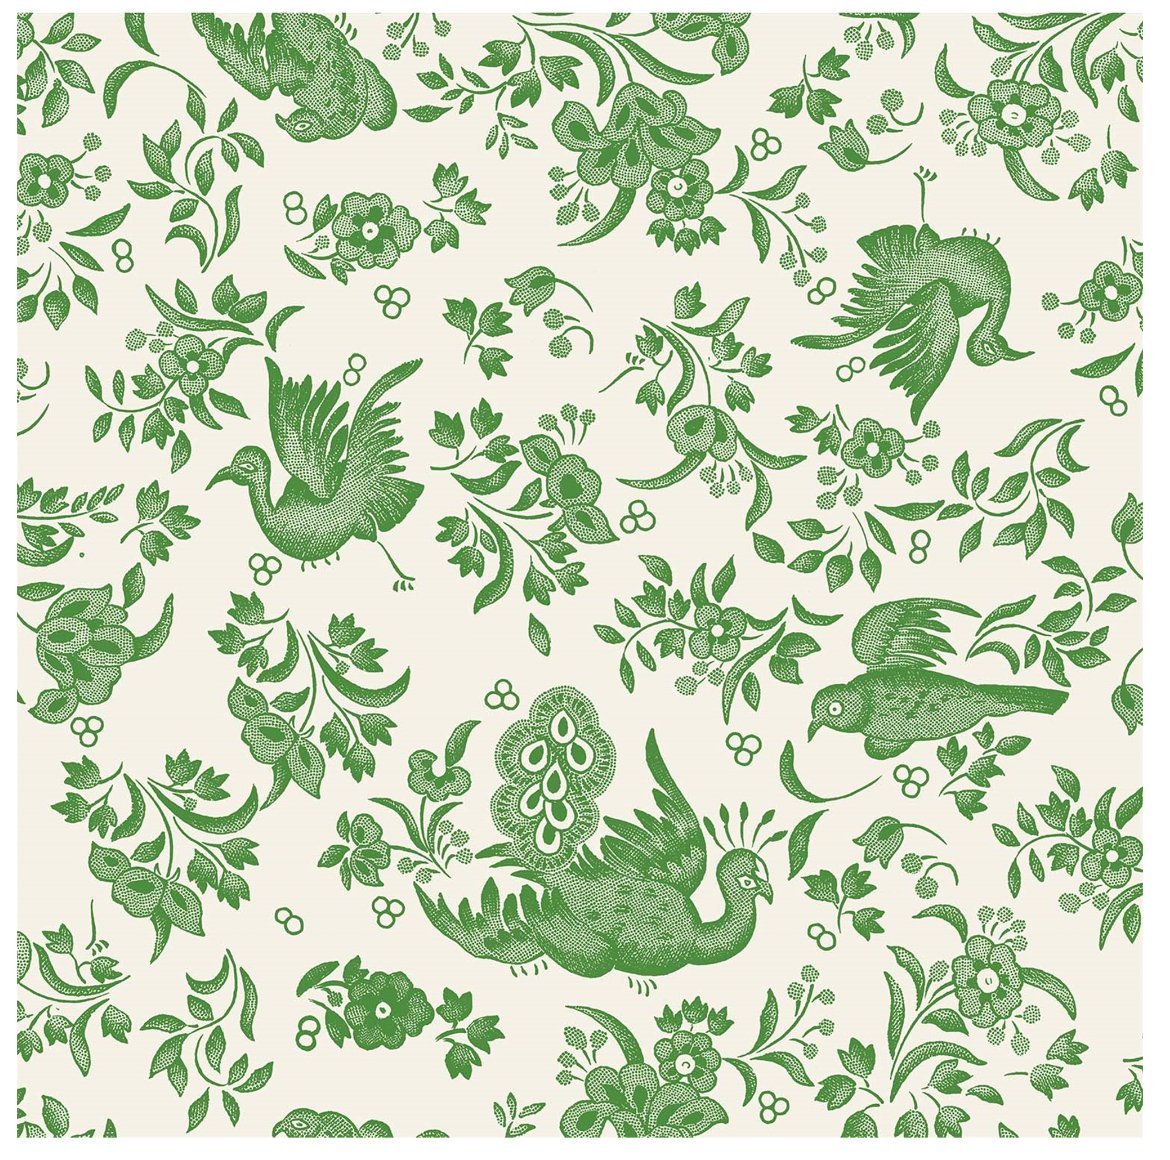 GREEN REGAL PEACOCK COCKTAIL NAPKIN - PACK OF 20 Hester and Cook - Gaines Jewelers